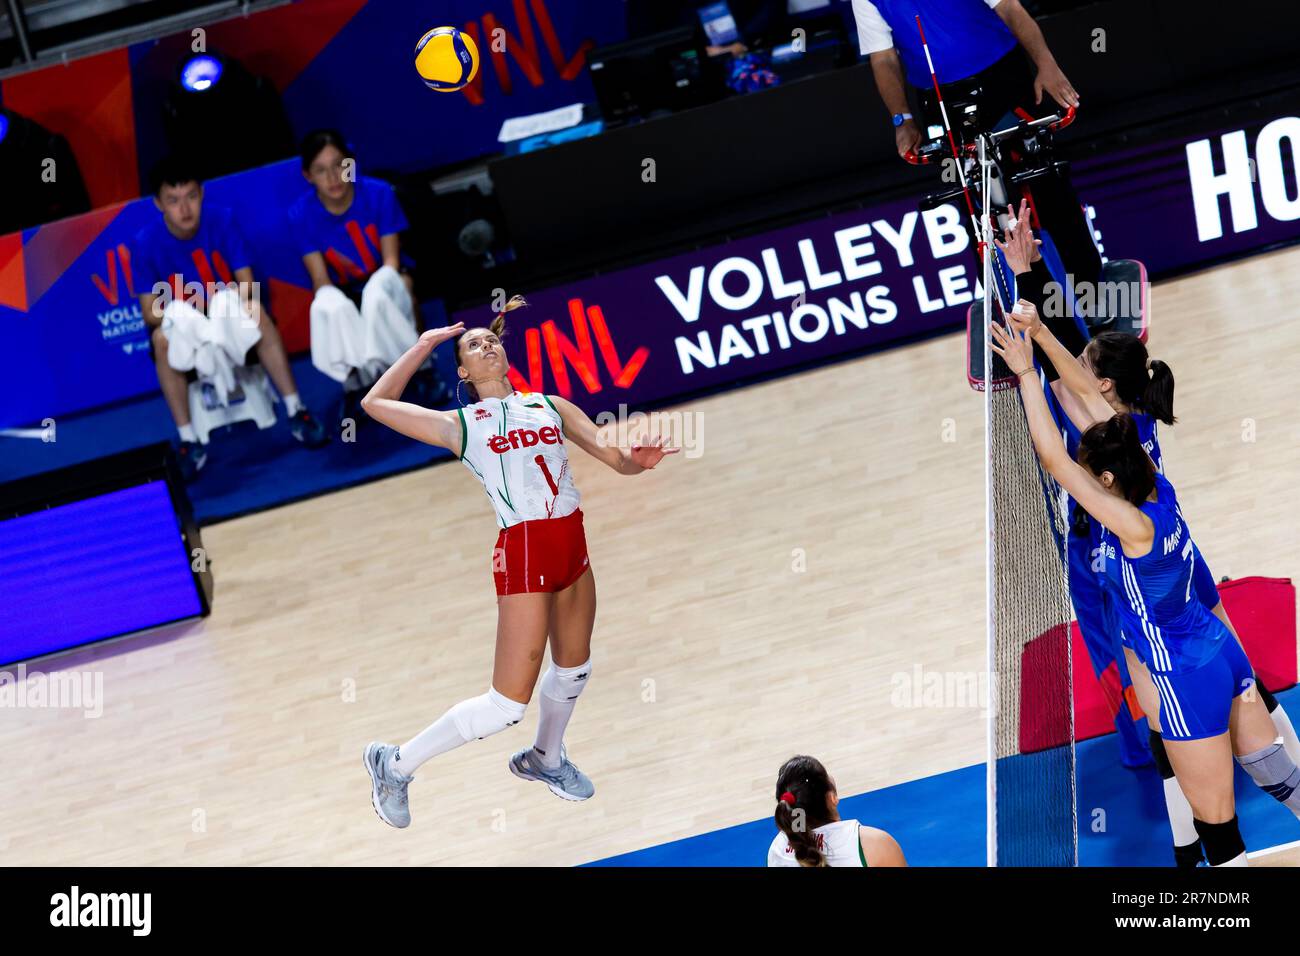 Fivb volleyball nations league hi-res stock photography and images - Page 4 